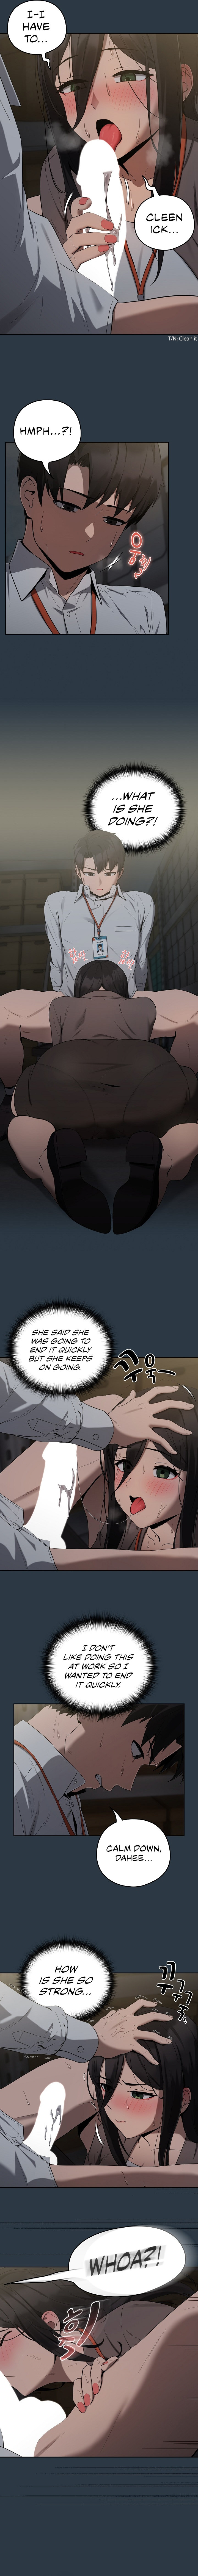 After Work Love Affairs - Chapter 10 Page 8